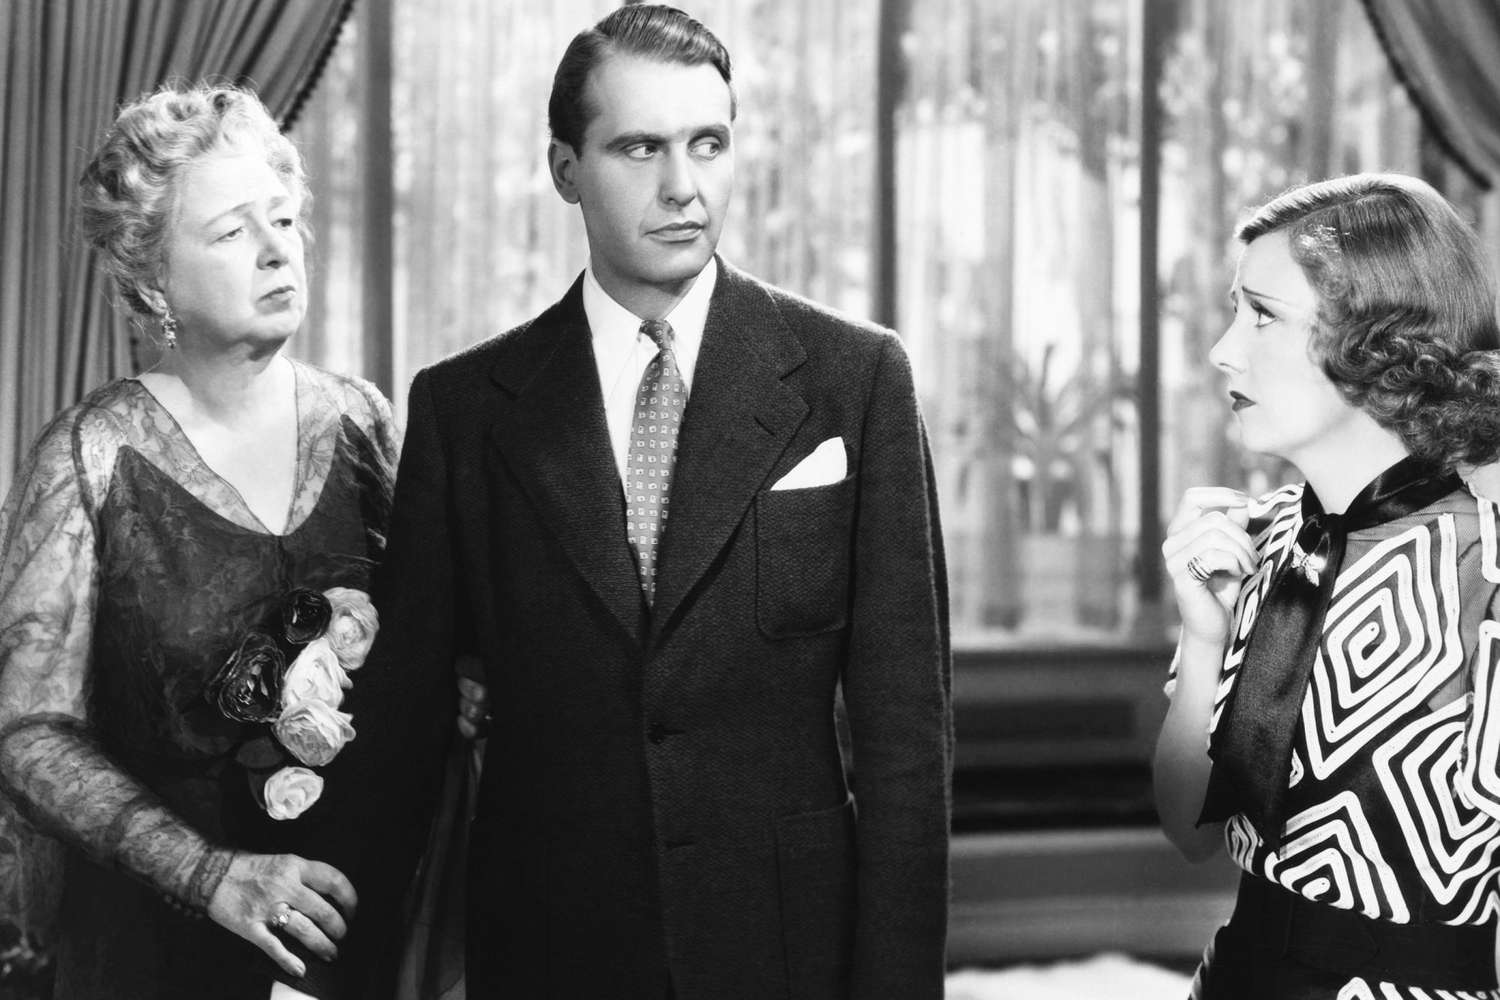 THE AWFUL TRUTH, from left: Esther Dale, Ralph Bellamy, Irene Dunne, 1937